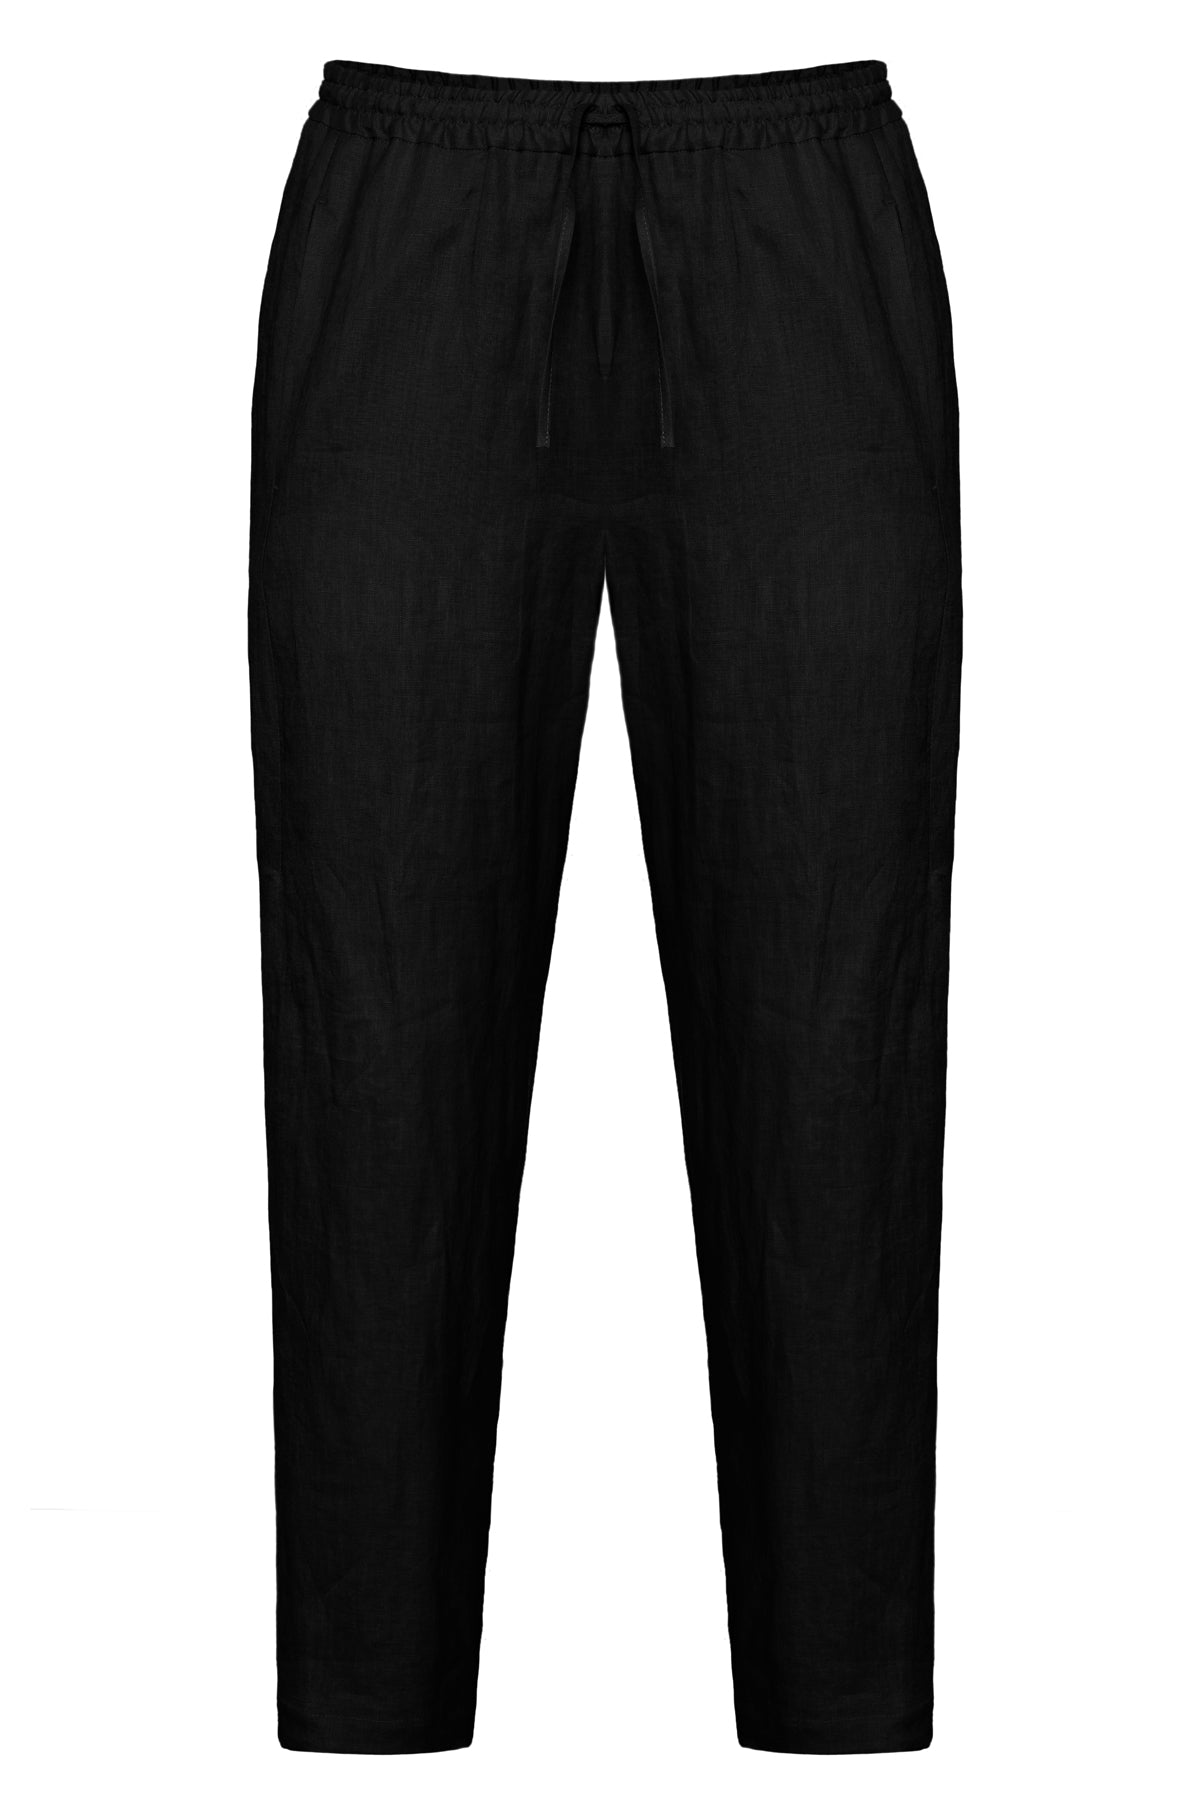 Linen Rich Tapered Ankle Grazer Trousers Black